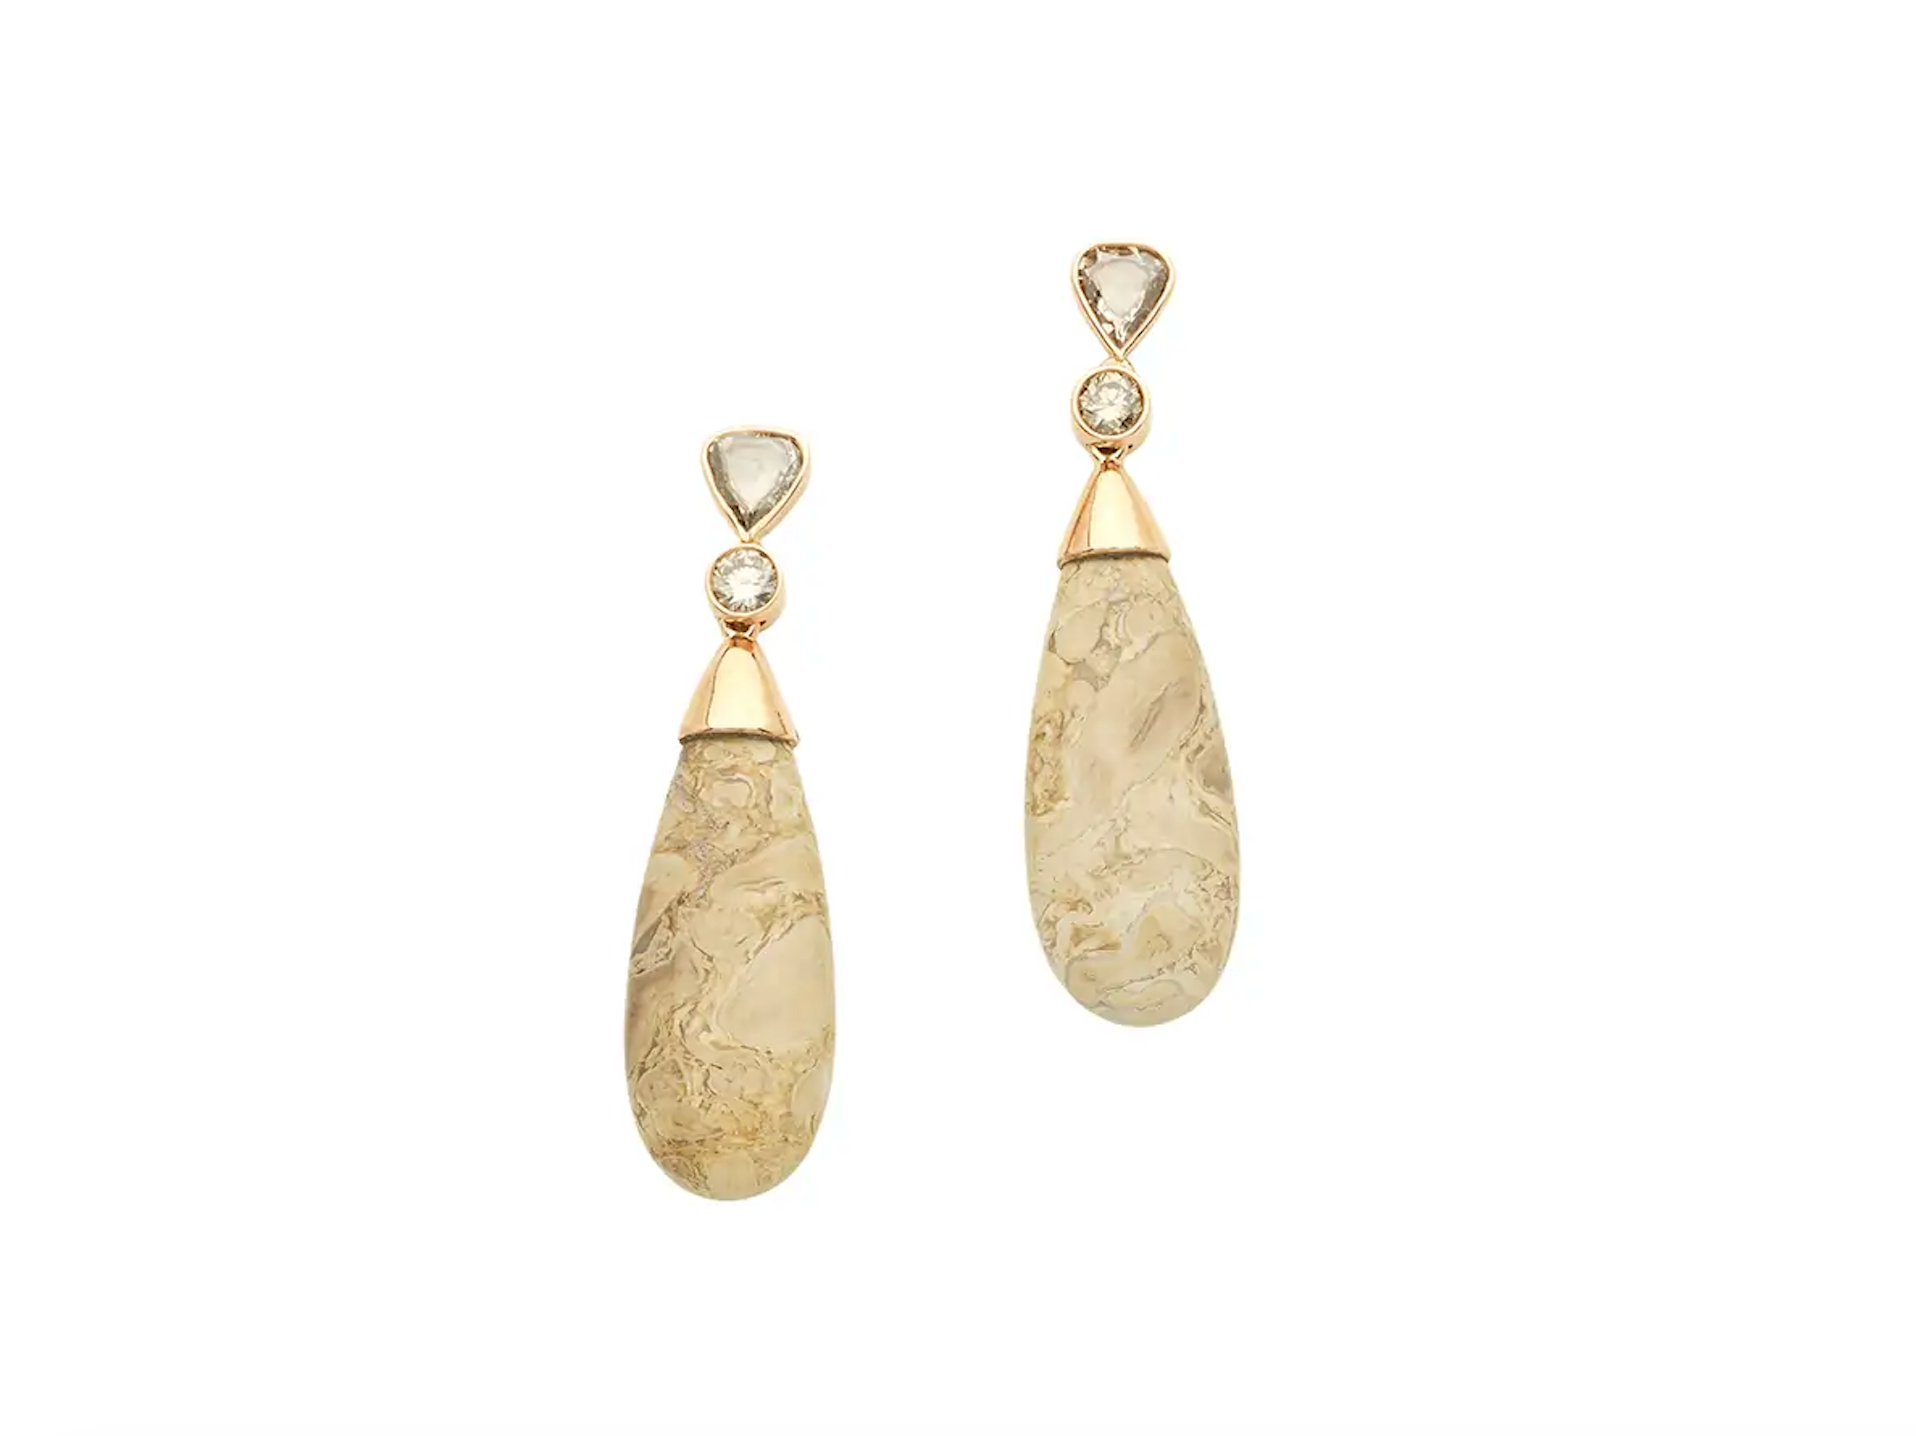 18 krt red gold earrings with 2 flat diamonds, 2 brilliant diamonds and petrified wood drops